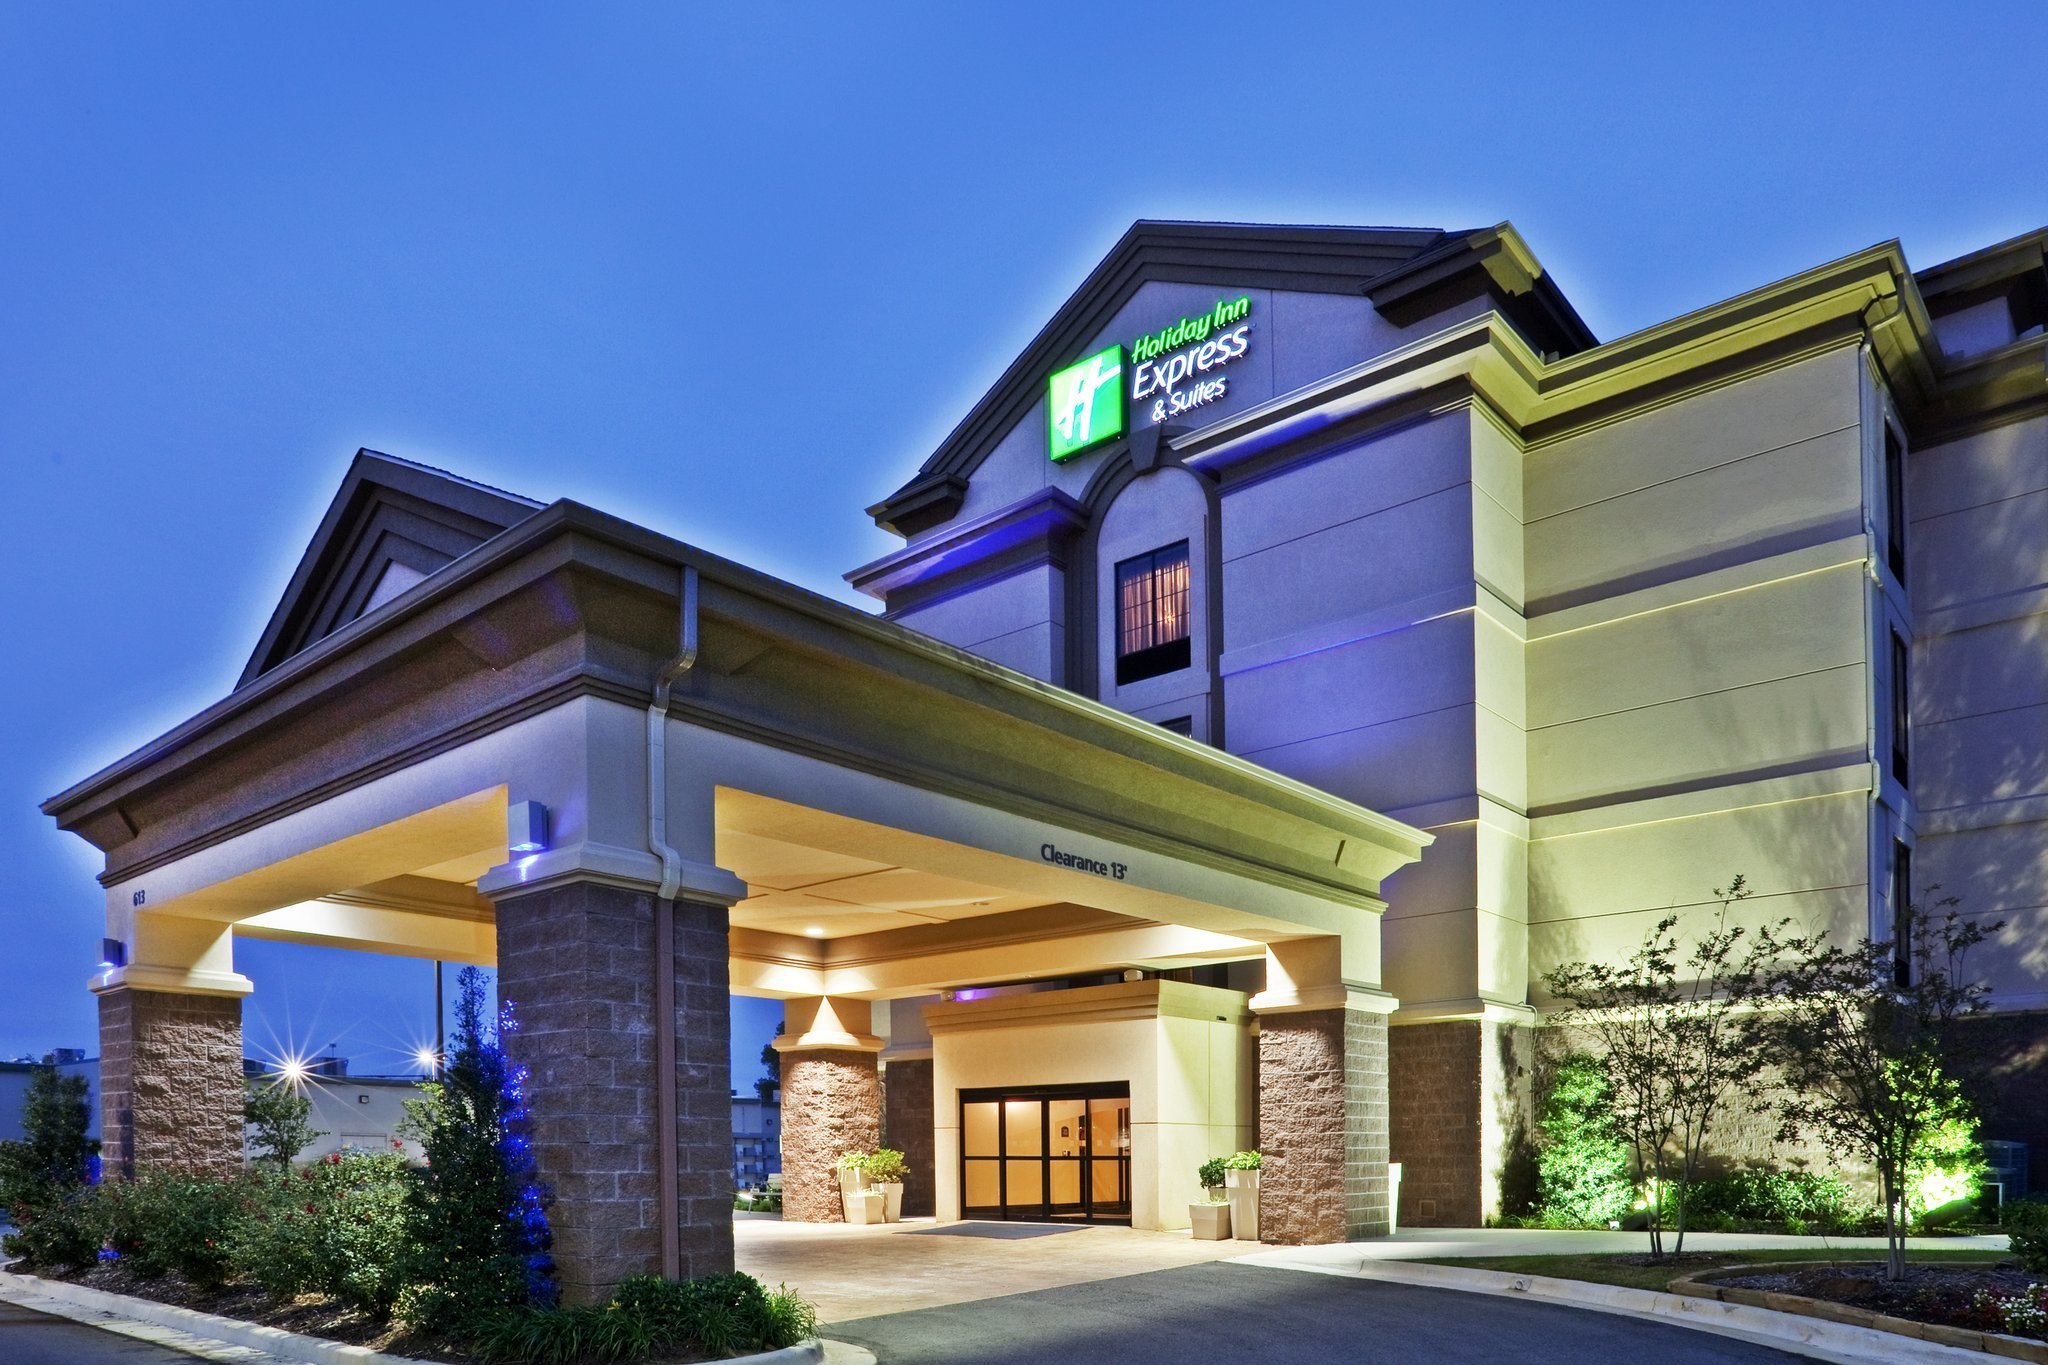 Photo of Holiday Inn Express & Suites Durant, Durant, OK